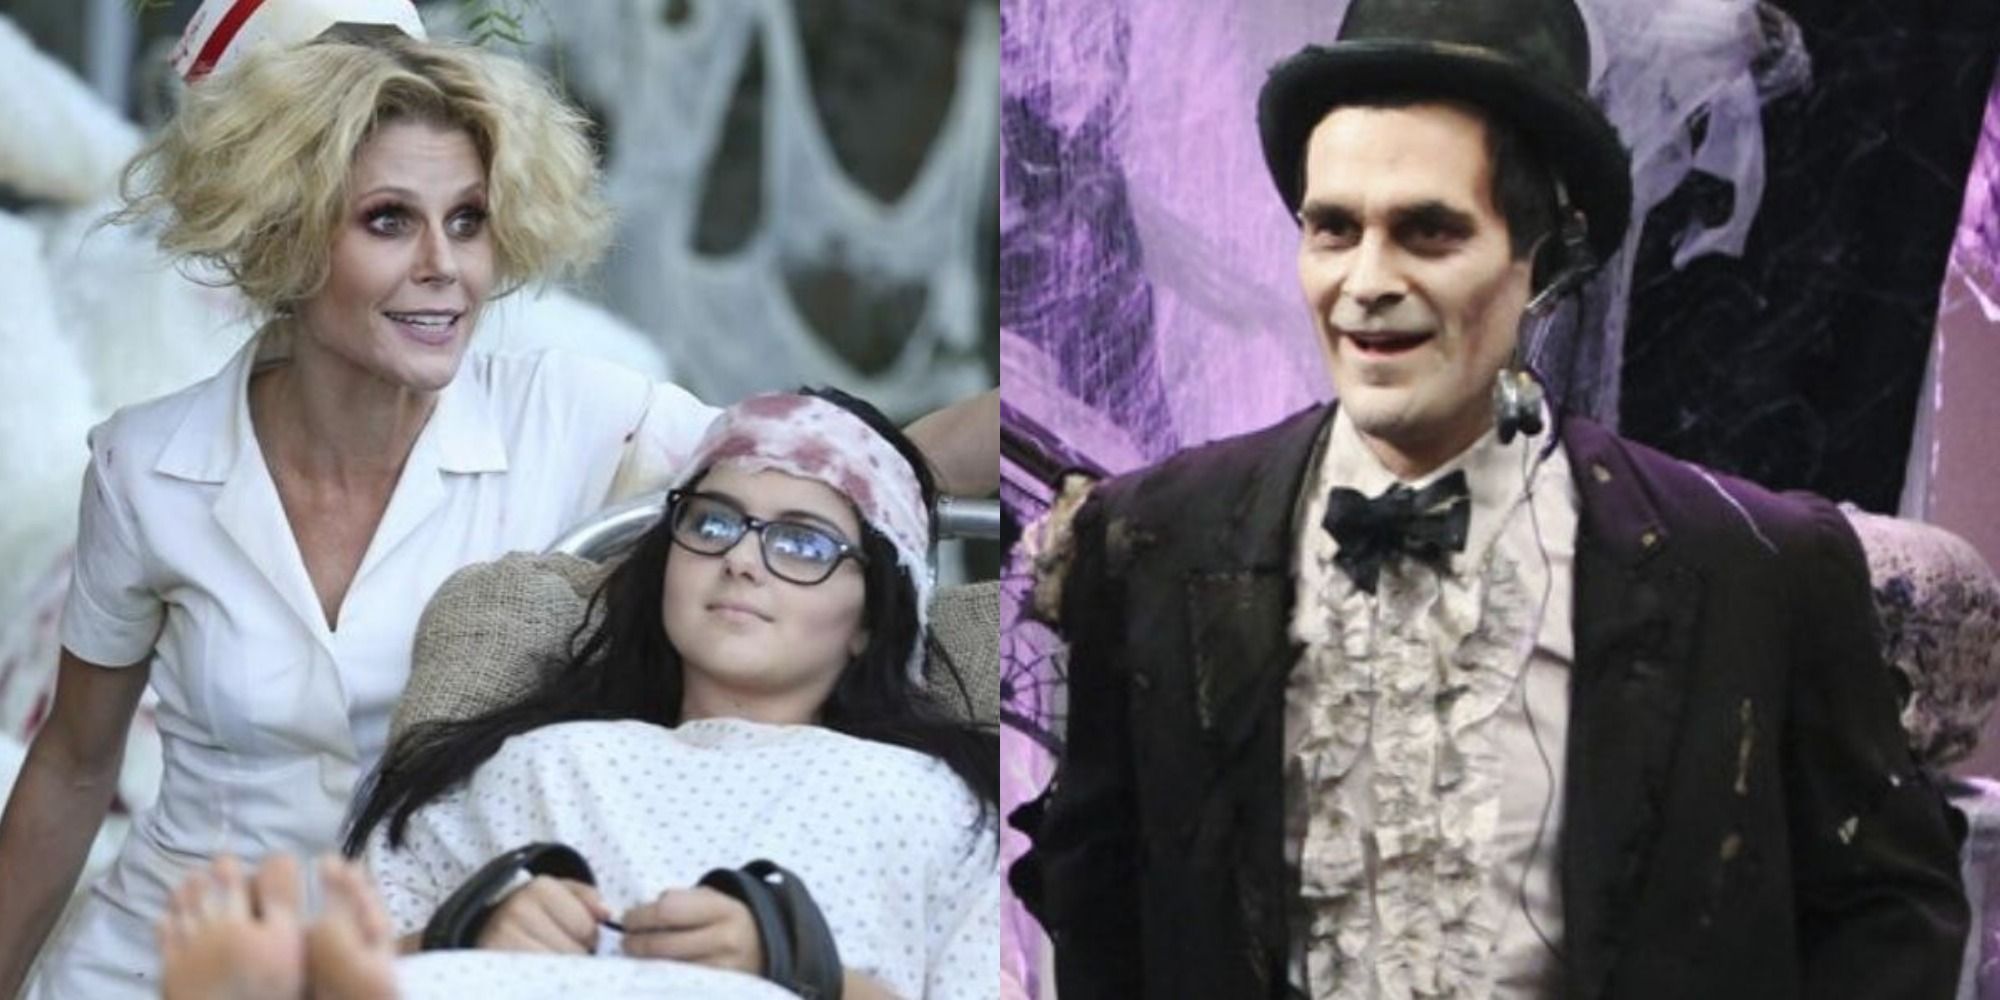 Split image of Claire Alex and Phil in Halloween costumes on Modern Family